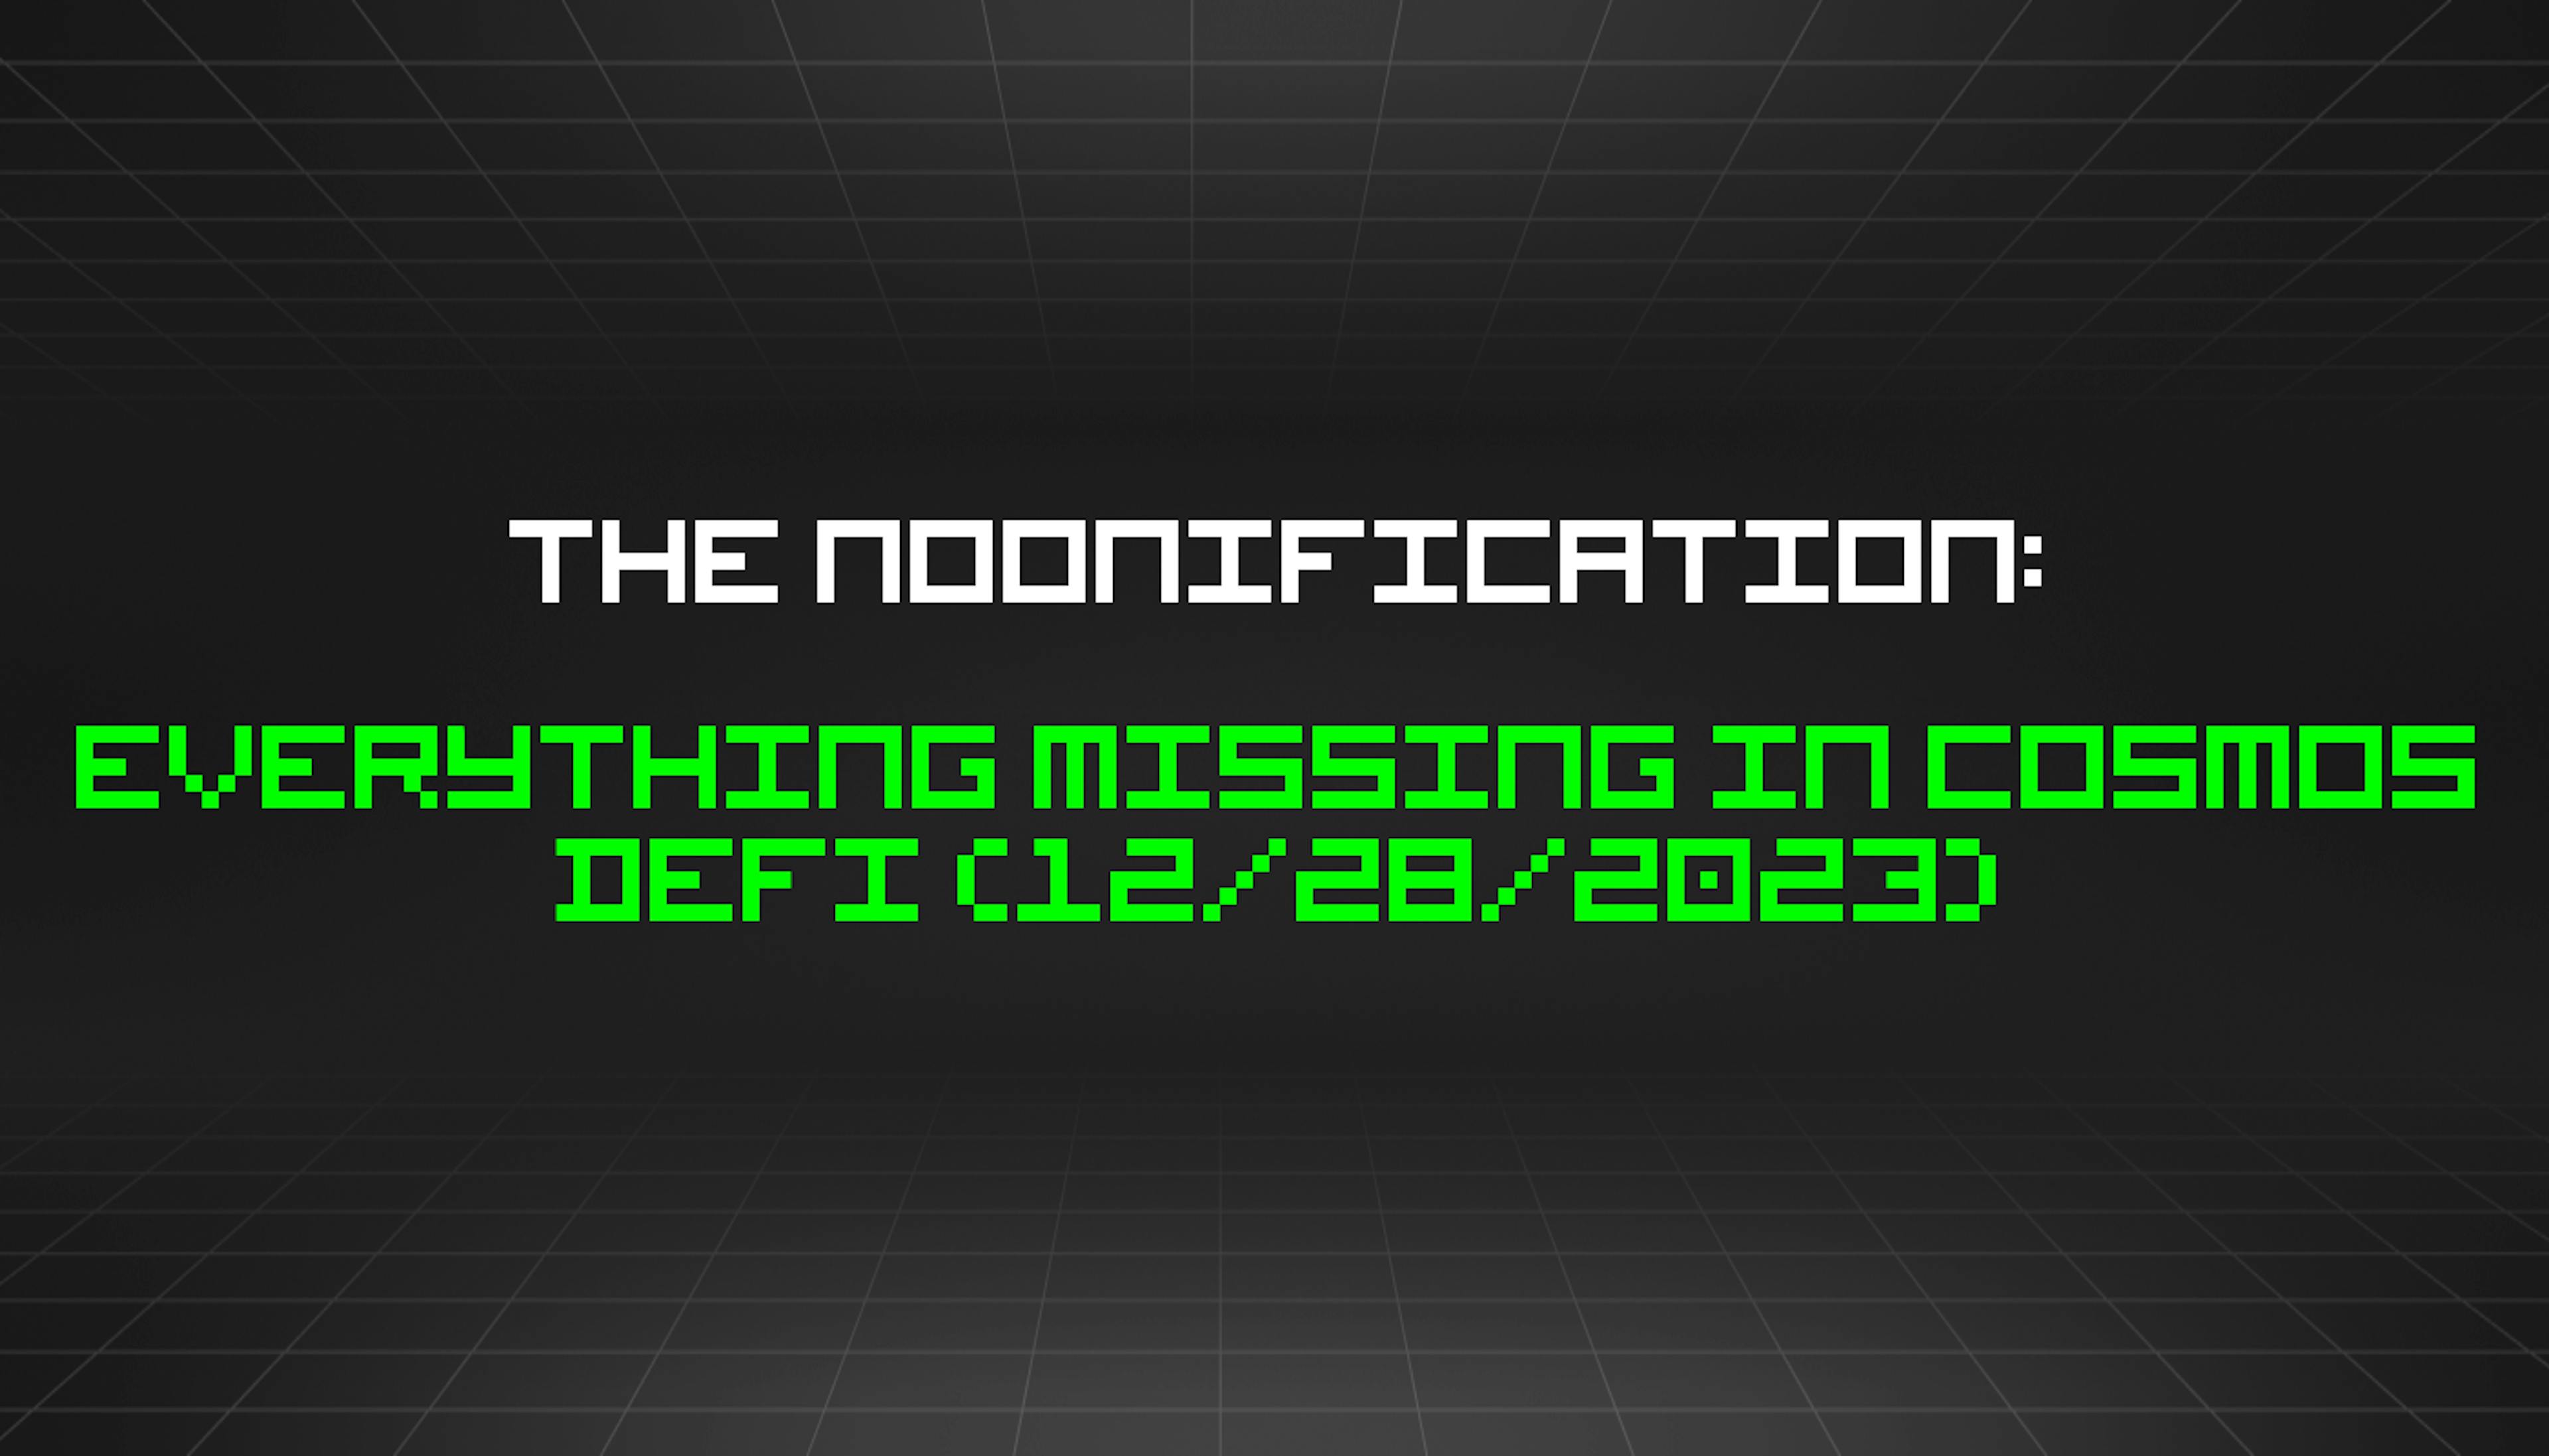 featured image - The Noonification: Everything Missing in Cosmos DeFi (12/28/2023)